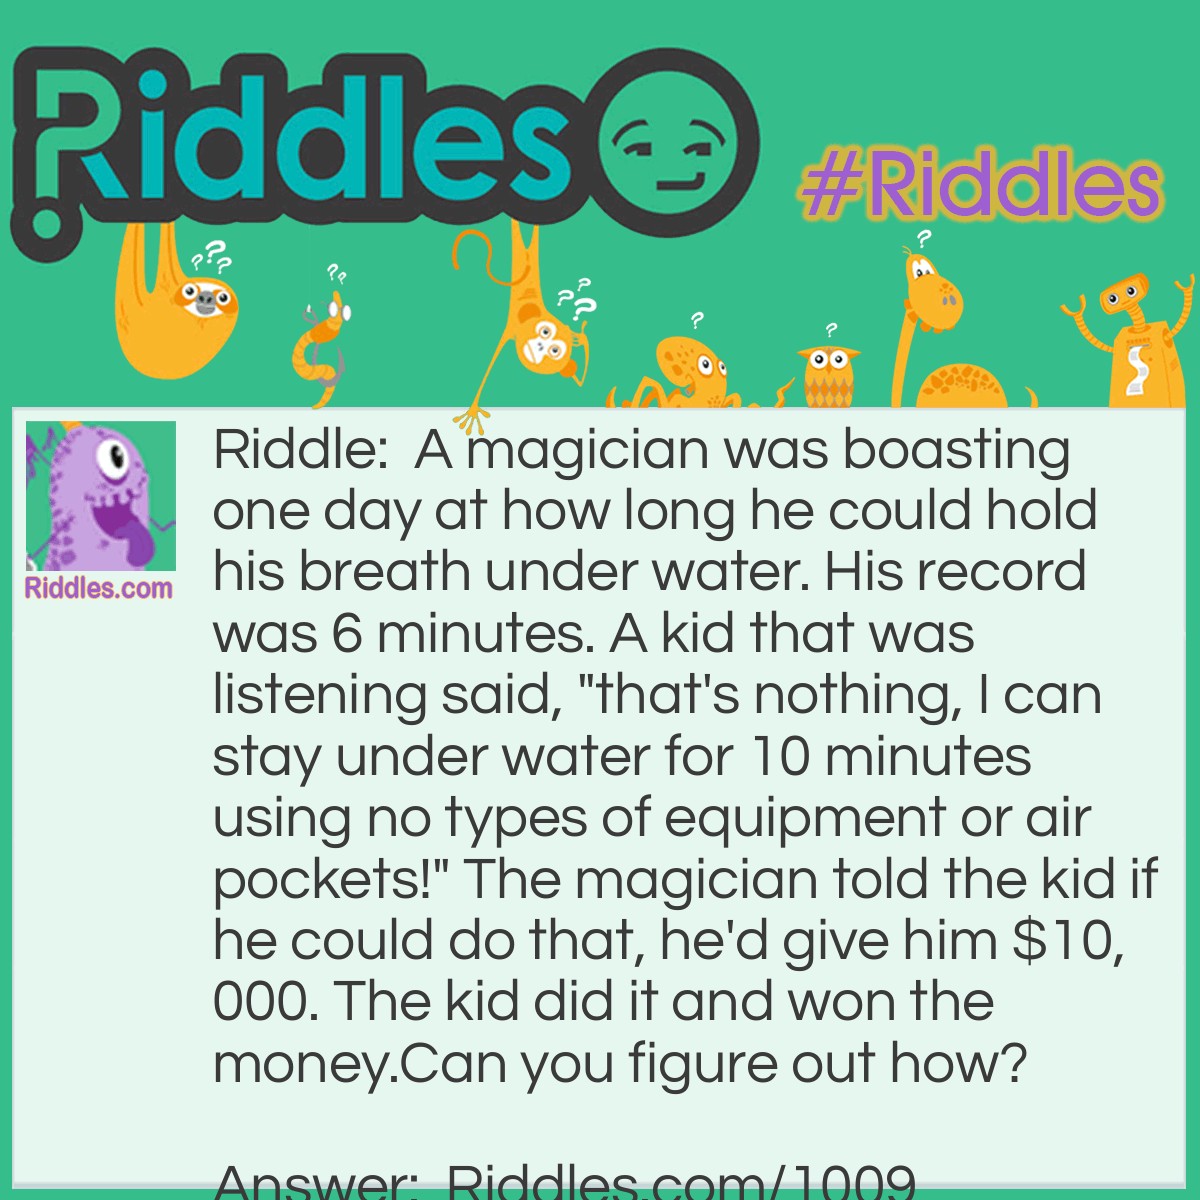 Riddle: A magician was boasting one day at how long he could hold his breath under water. His record was 6 minutes. A kid that was listening said, "that's nothing, I can stay under water for 10 minutes using no types of equipment or air pockets!" The magician told the kid if he could do that, he'd give him $10,000. The kid did it and won the money.
Can you figure out how?  Answer: The kid filled a glass of water and held it over his head for 10 minutes.